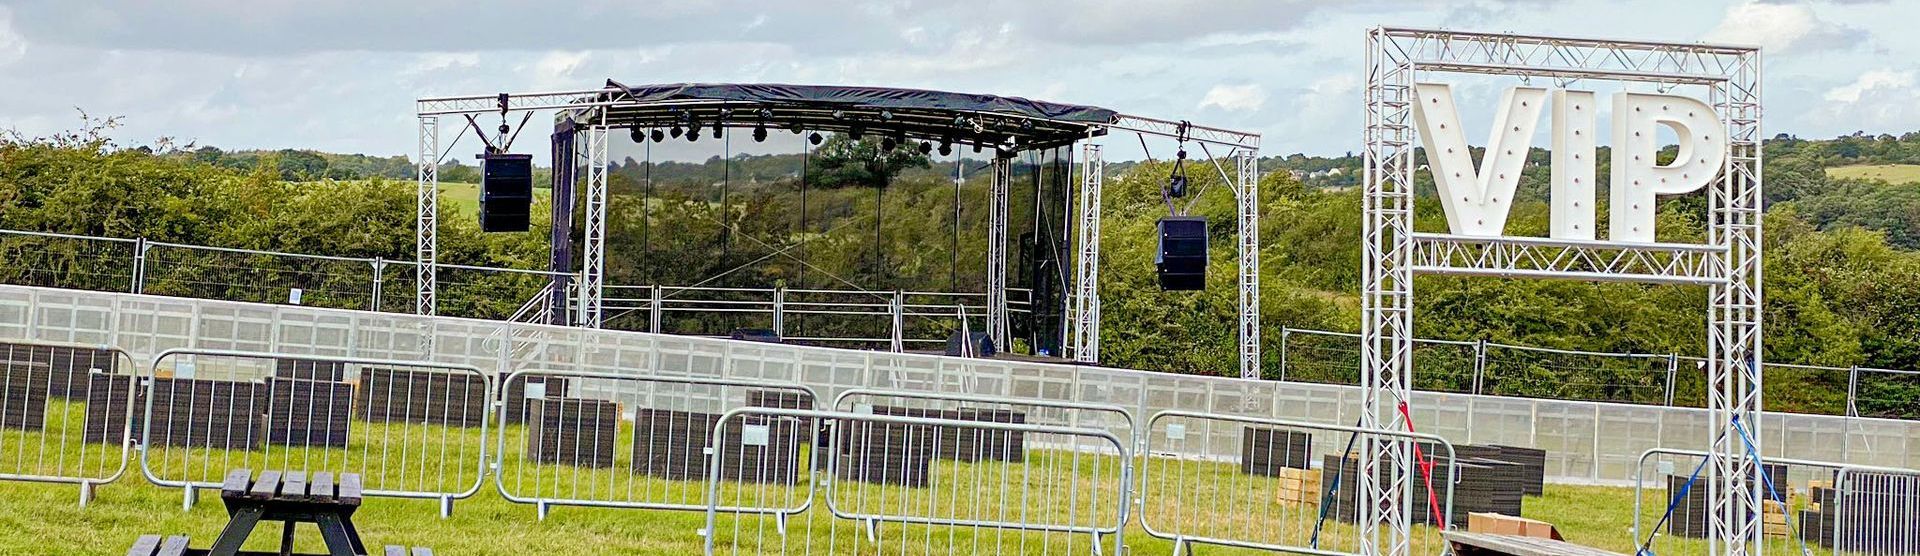 8m x 6m trailer stage with PA wings and a sound rig attached in a field with a view over forests, with a large VIP sign and crowd barriers around it.